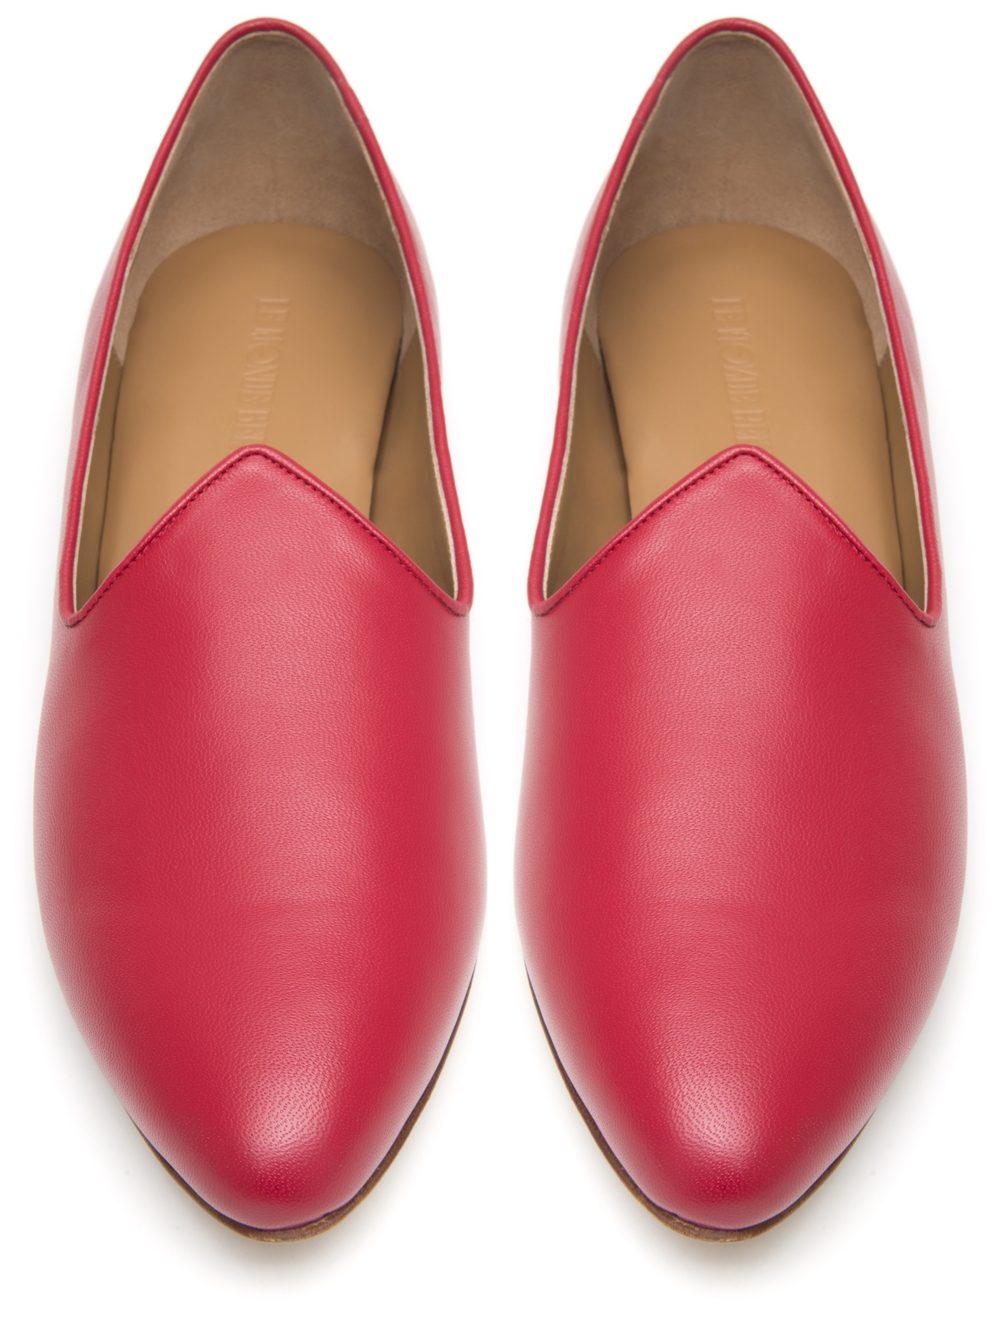 MORE is LOVE | Le Monde Beryl - Marlboro Red Slippers - Slippers